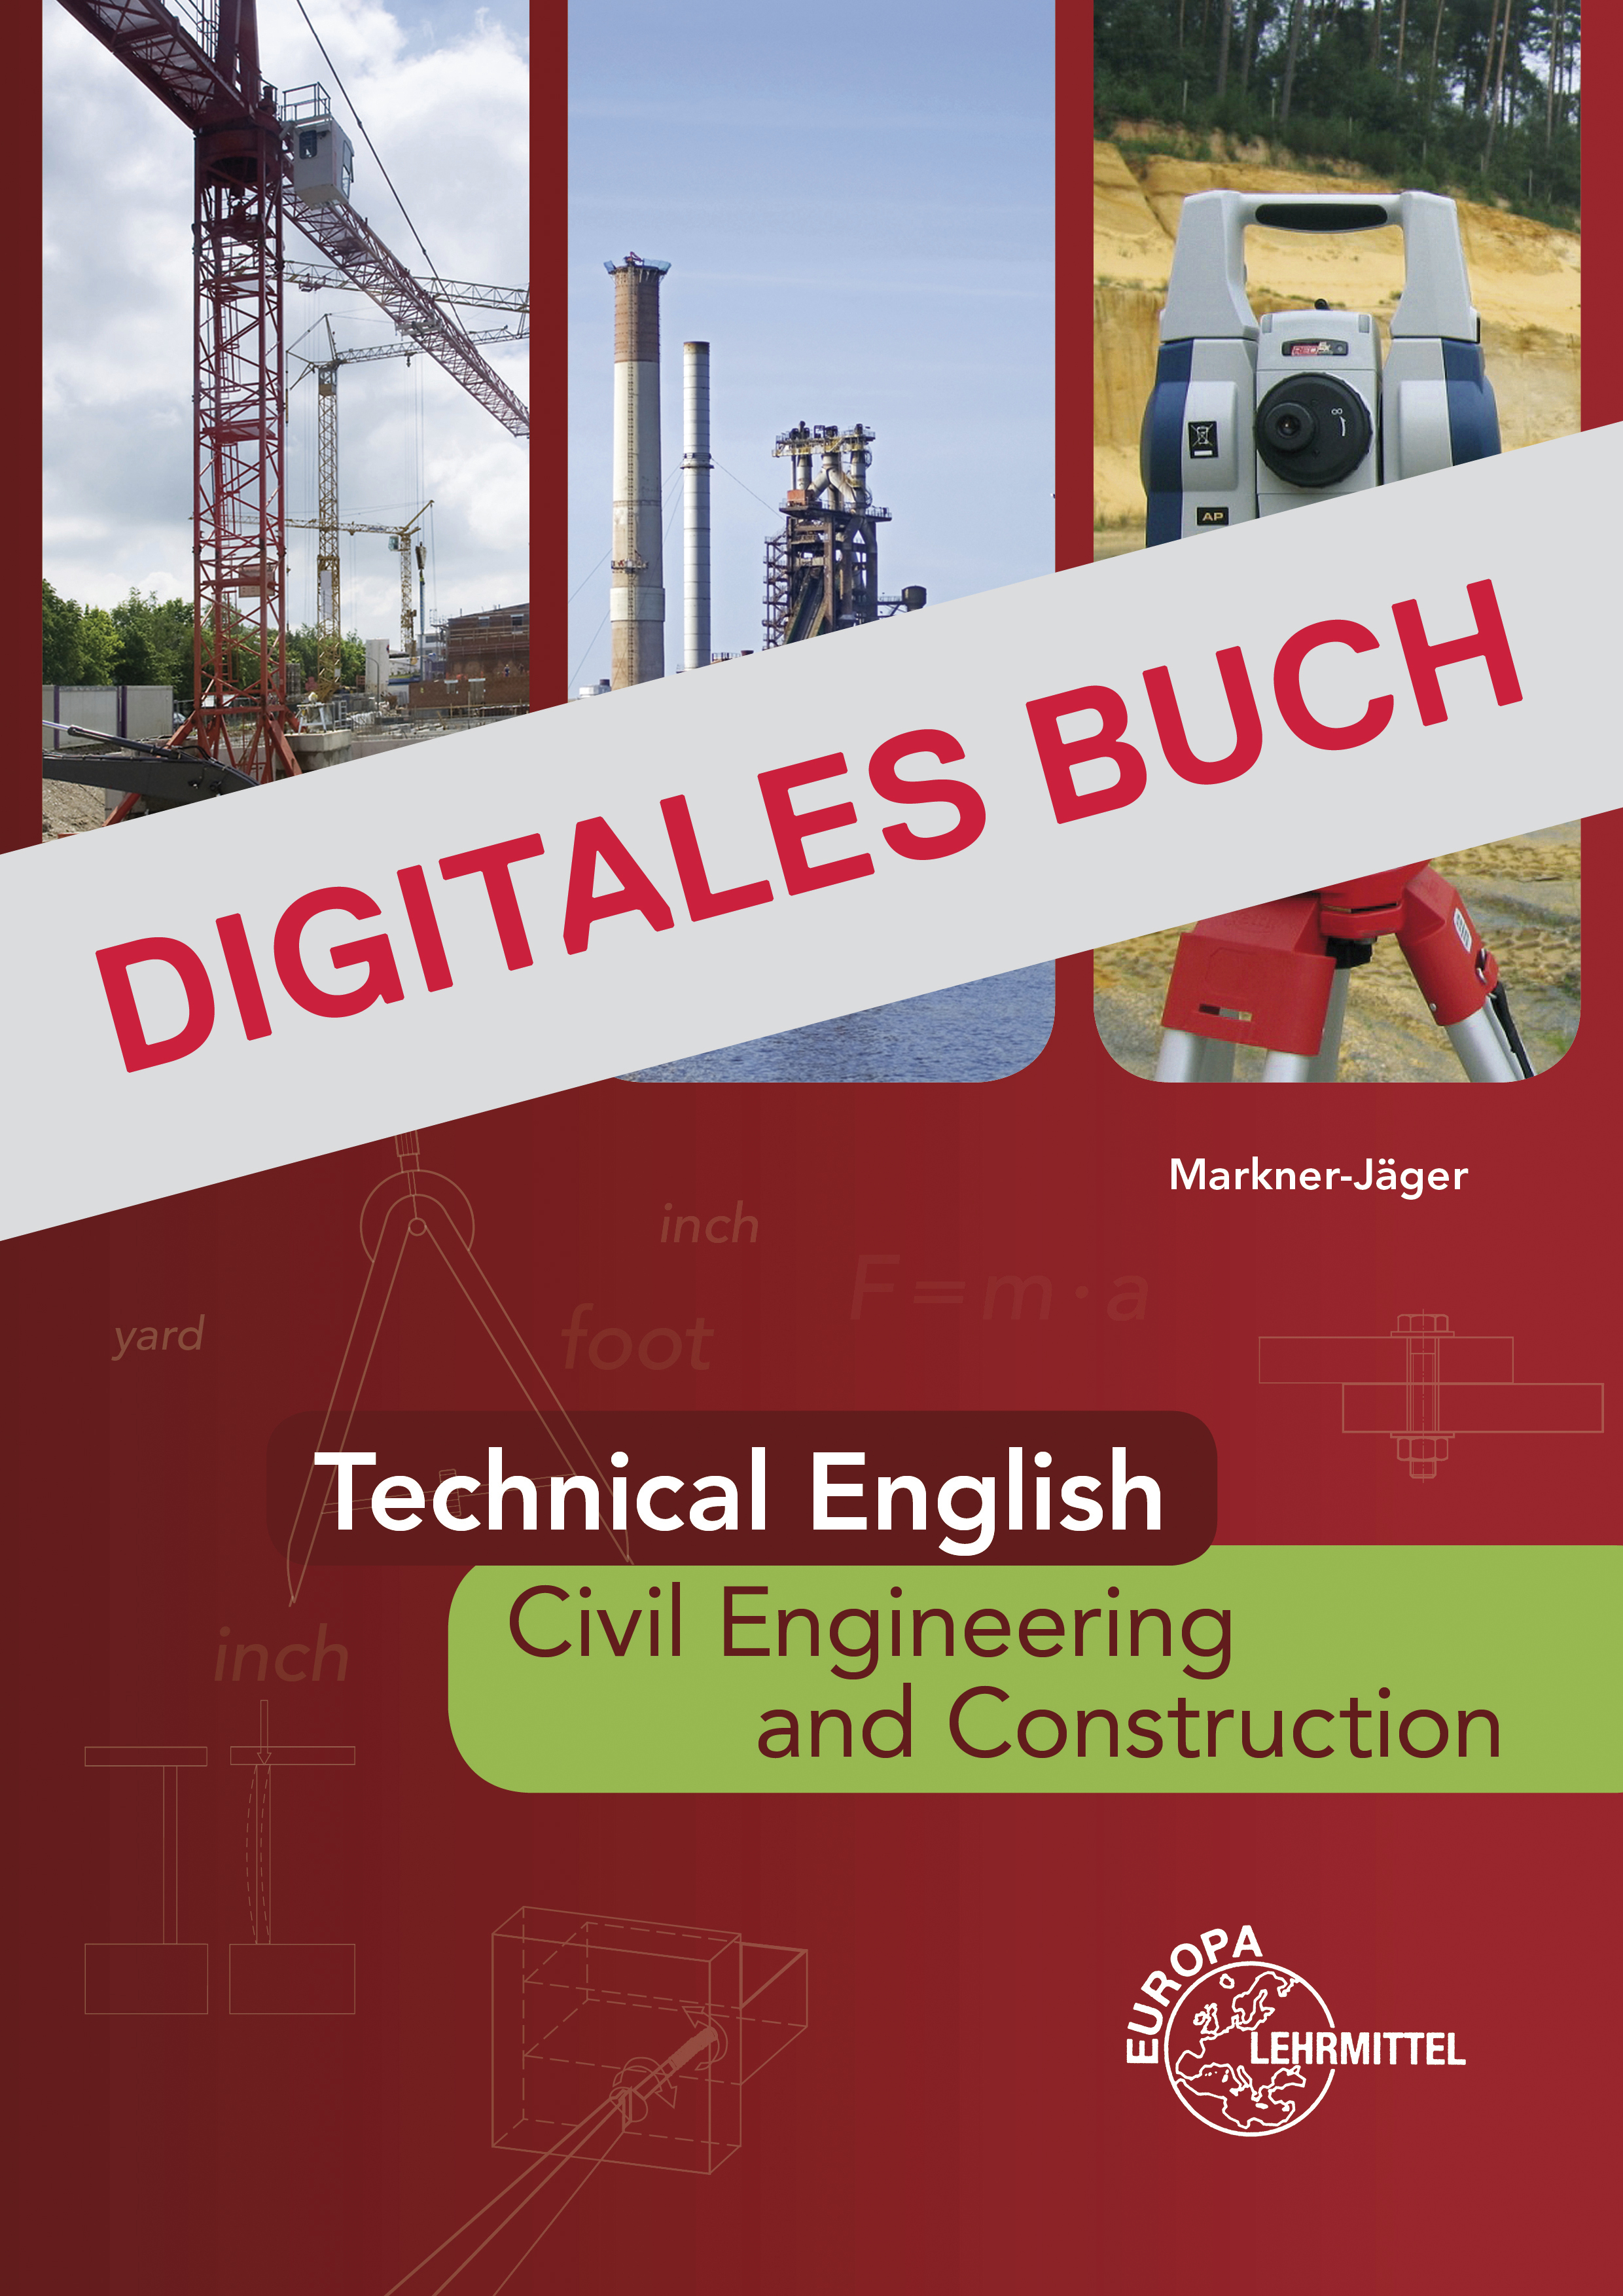 Technical English - Civil Engineering and Construction - Digitales Buch